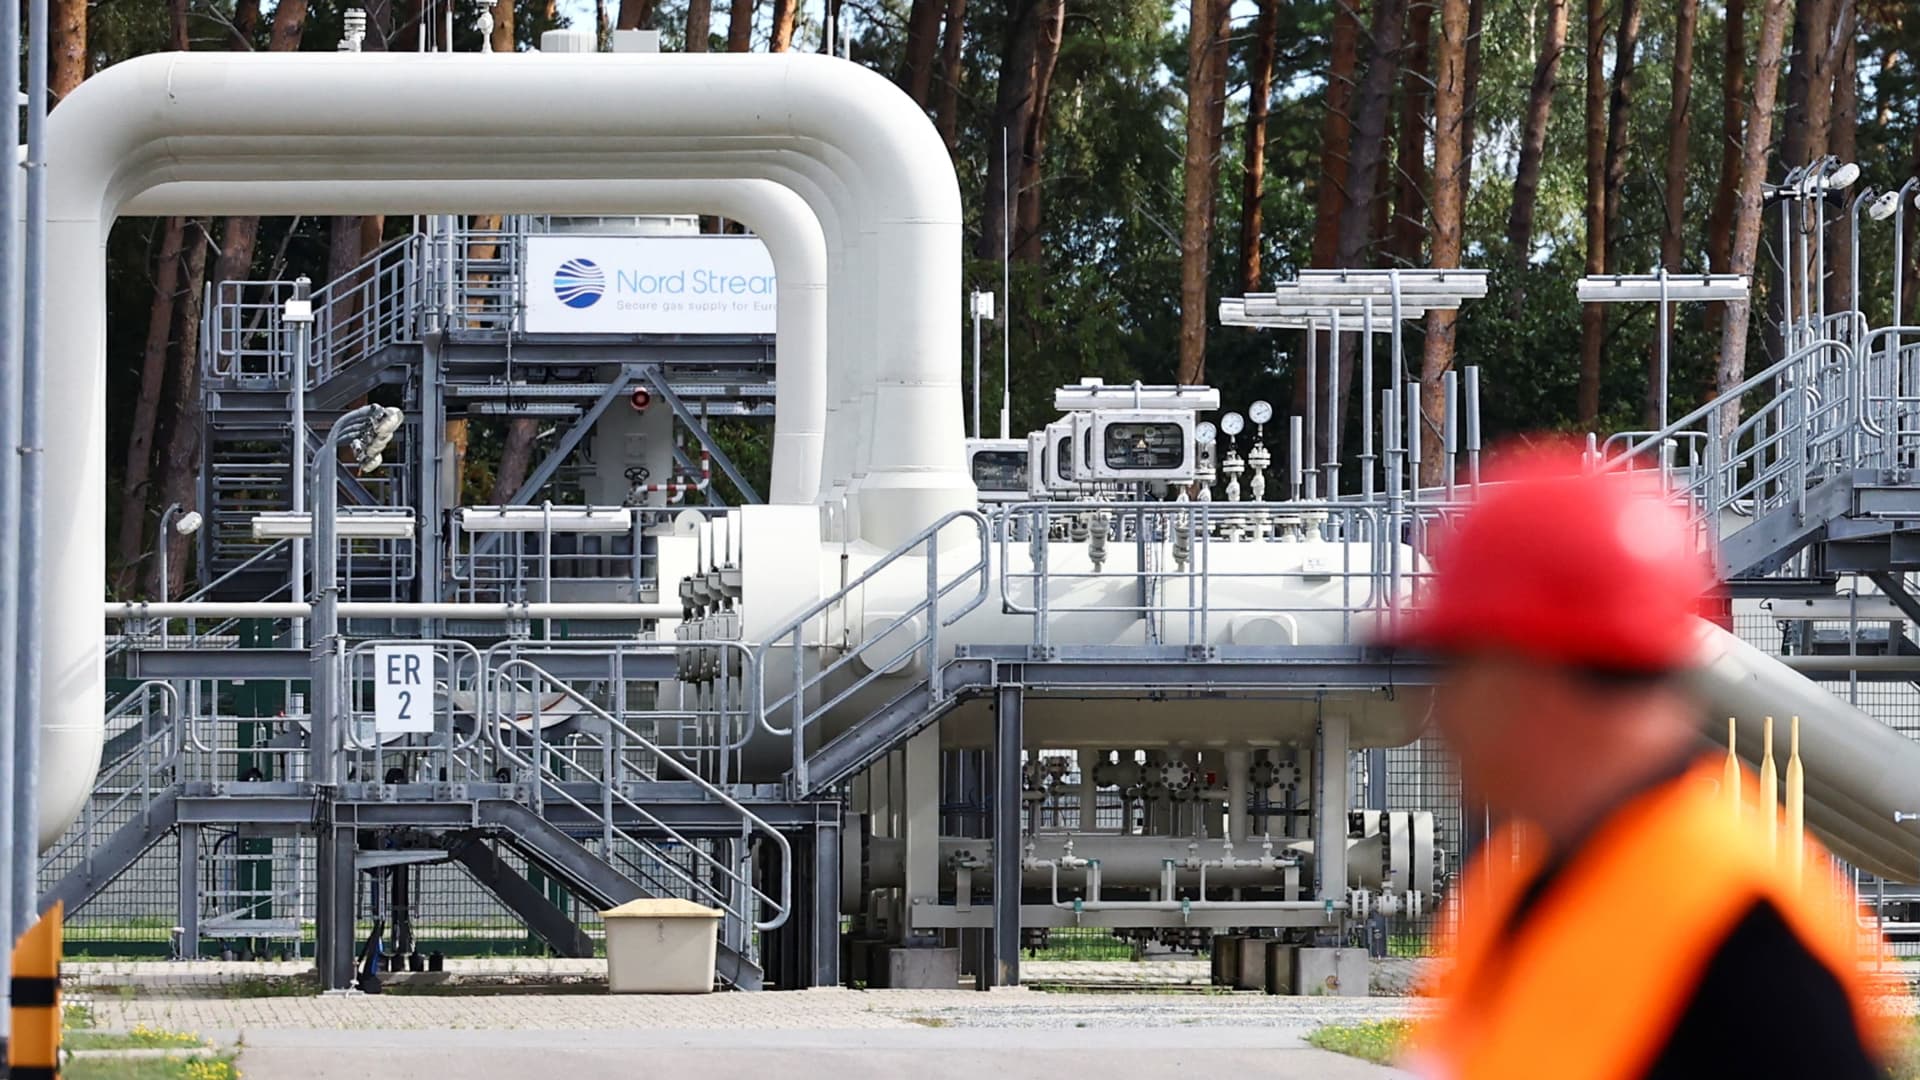 Why has Russia cut off gas supplies to Europe?